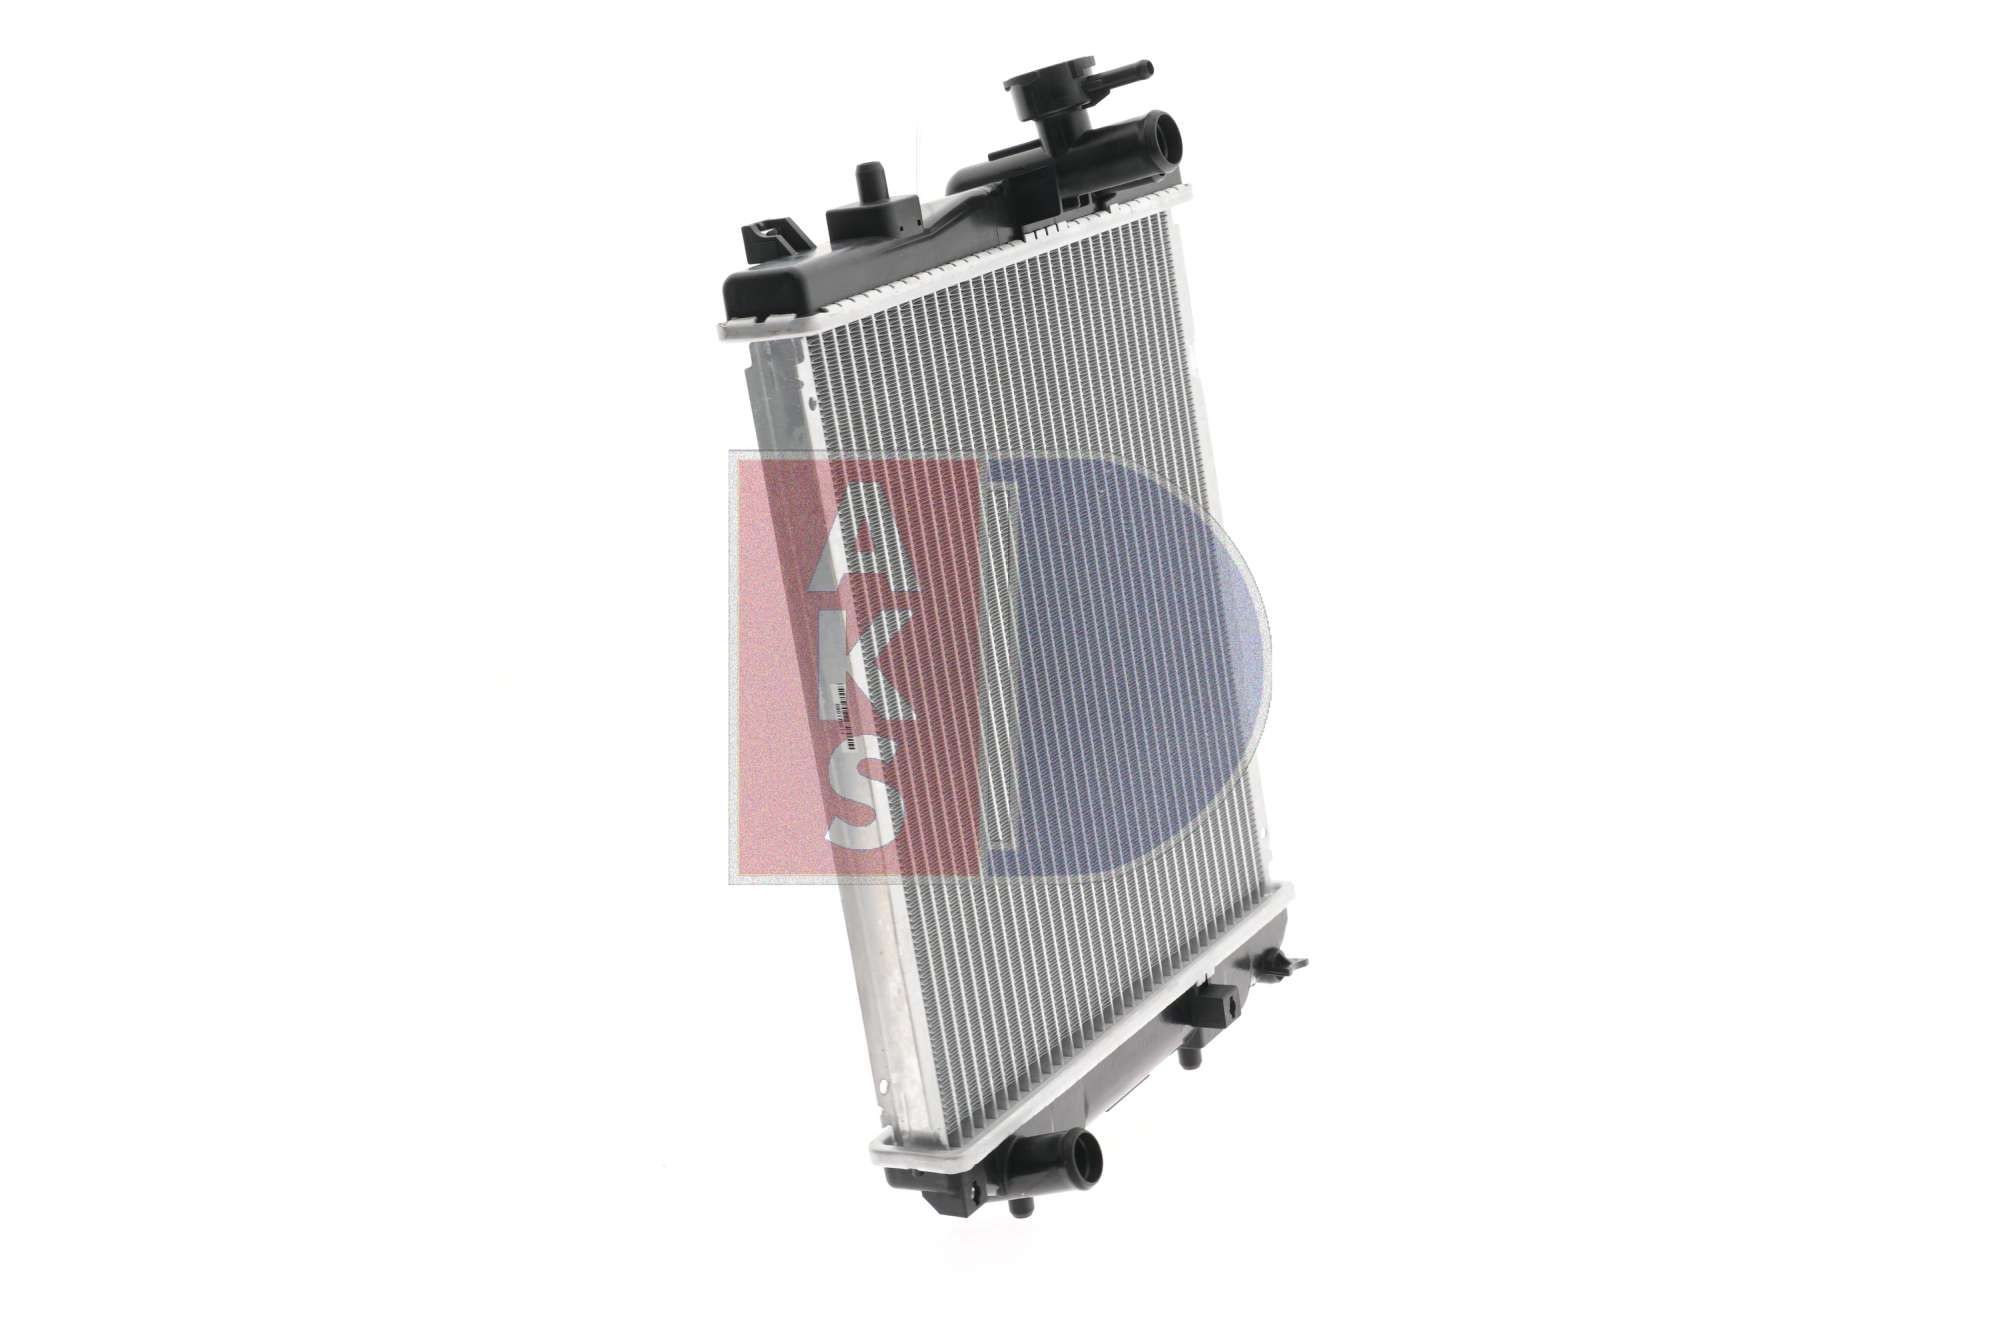 360035N Radiator 360035N AKS DASIS Aluminium, for vehicles with/without air conditioning, 350 x 318 x 25 mm, Manual Transmission, Brazed cooling fins